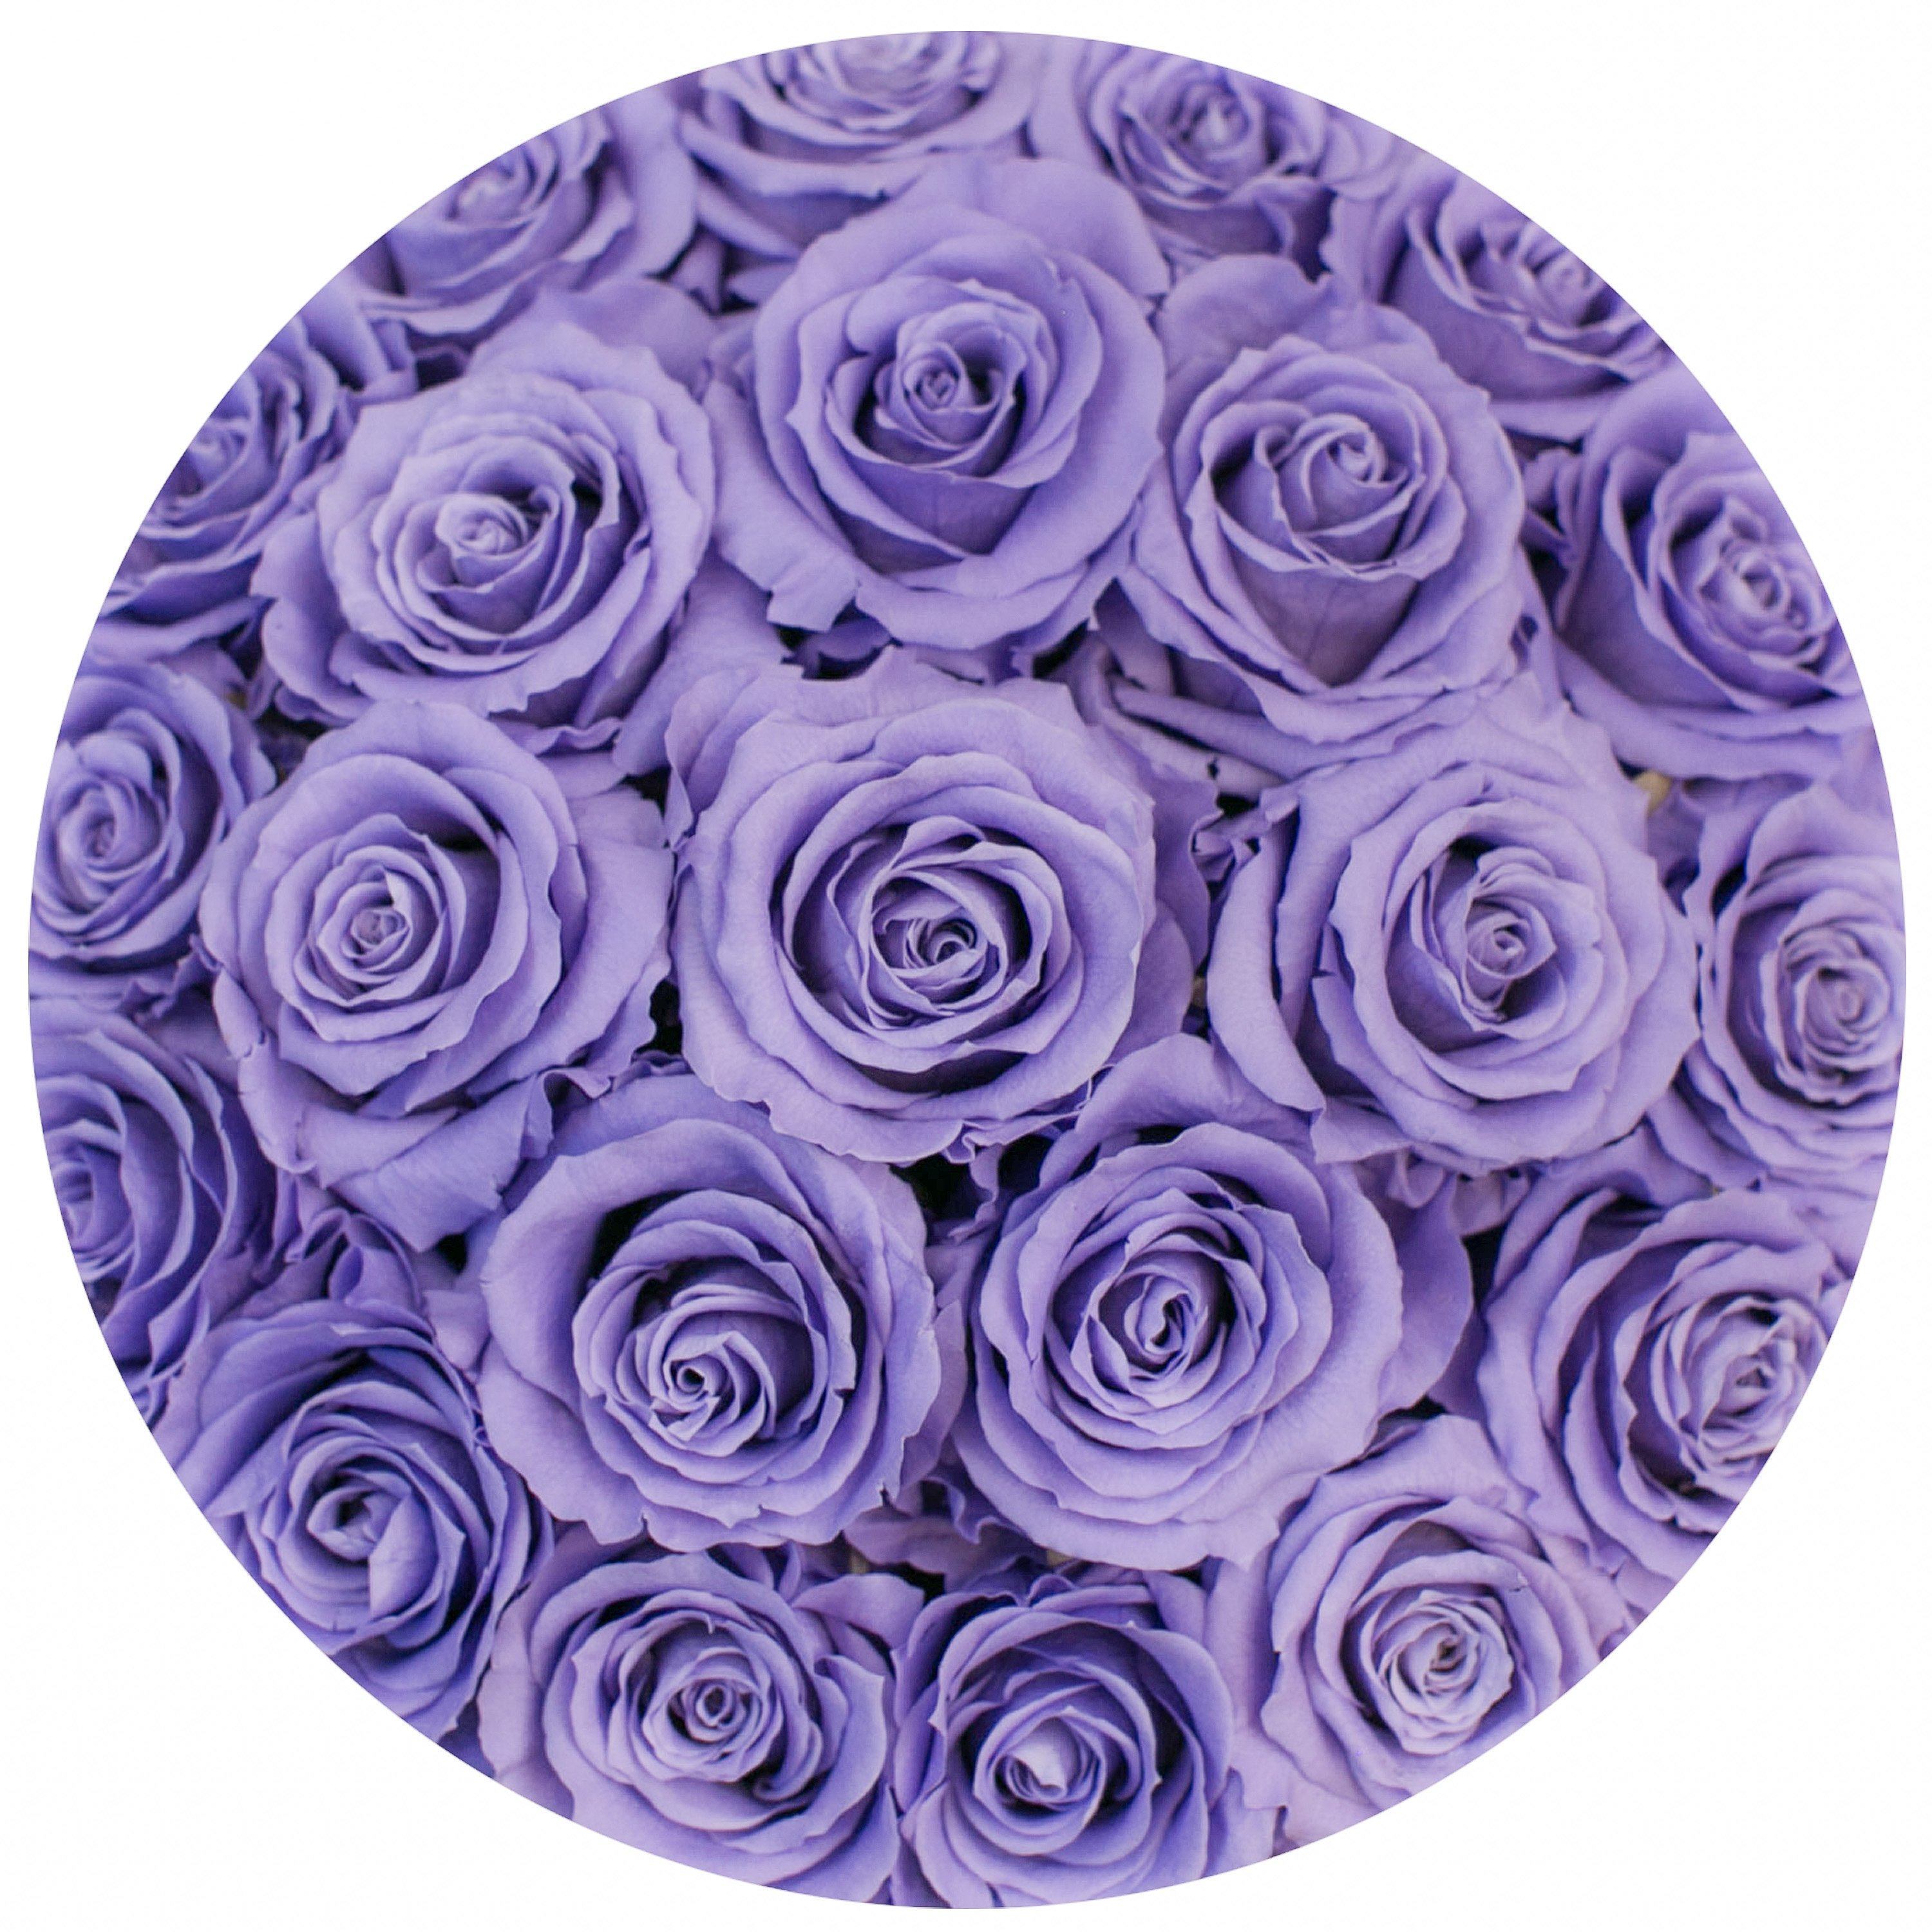 classic round box - hot-pink suede box - violet roses ( dome ) violet eternity roses - the million roses